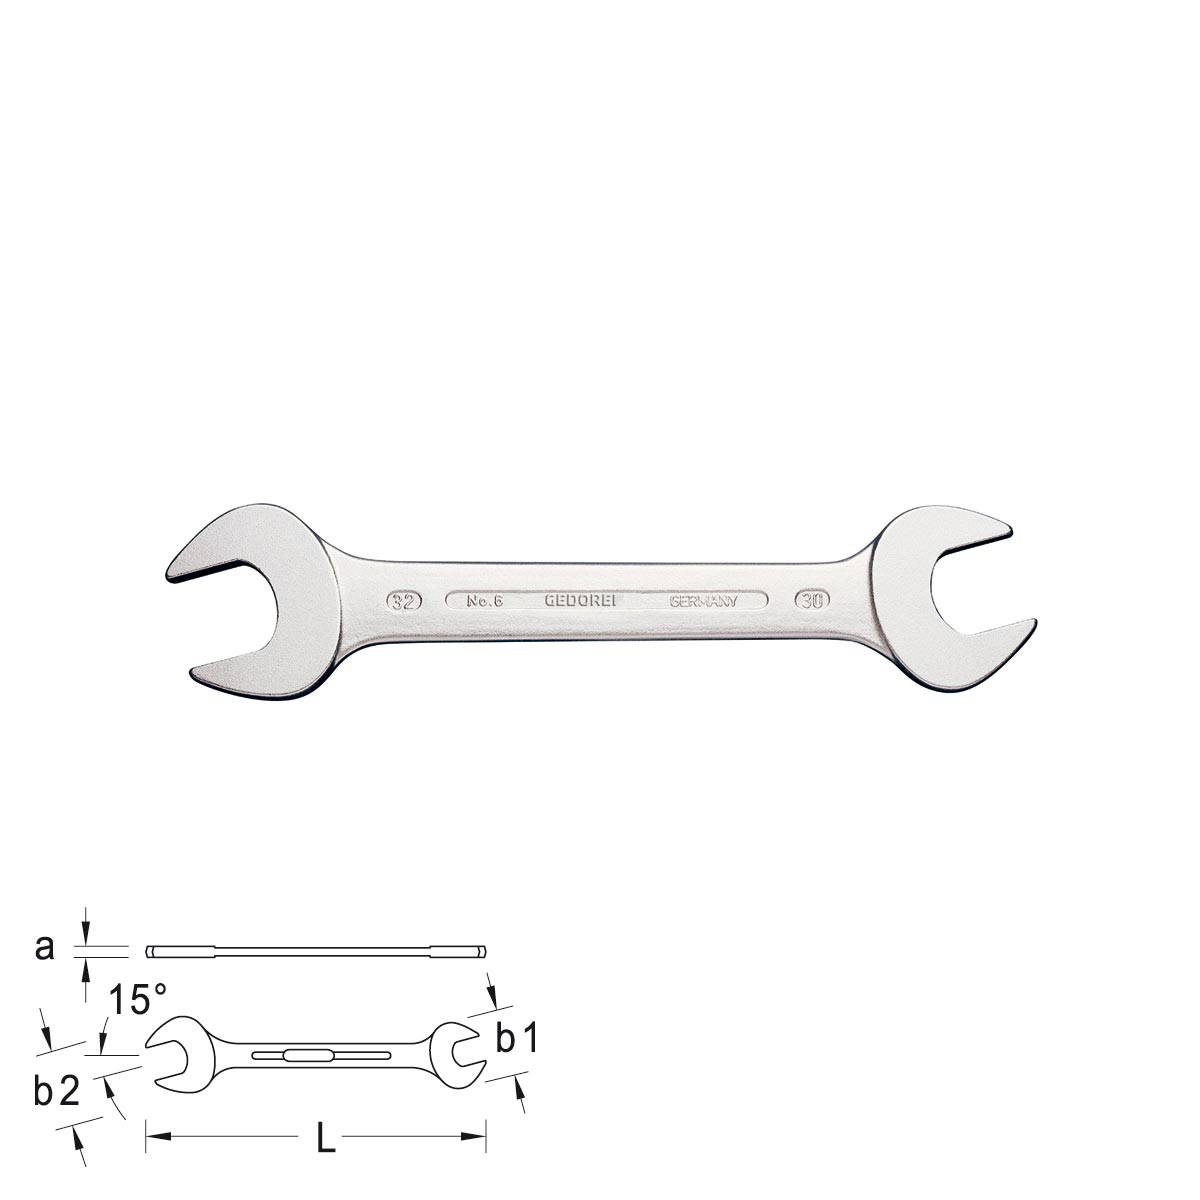 GEDORE Double open ended spanner 6, size 4 x 4.5 - 55 x 60 mm